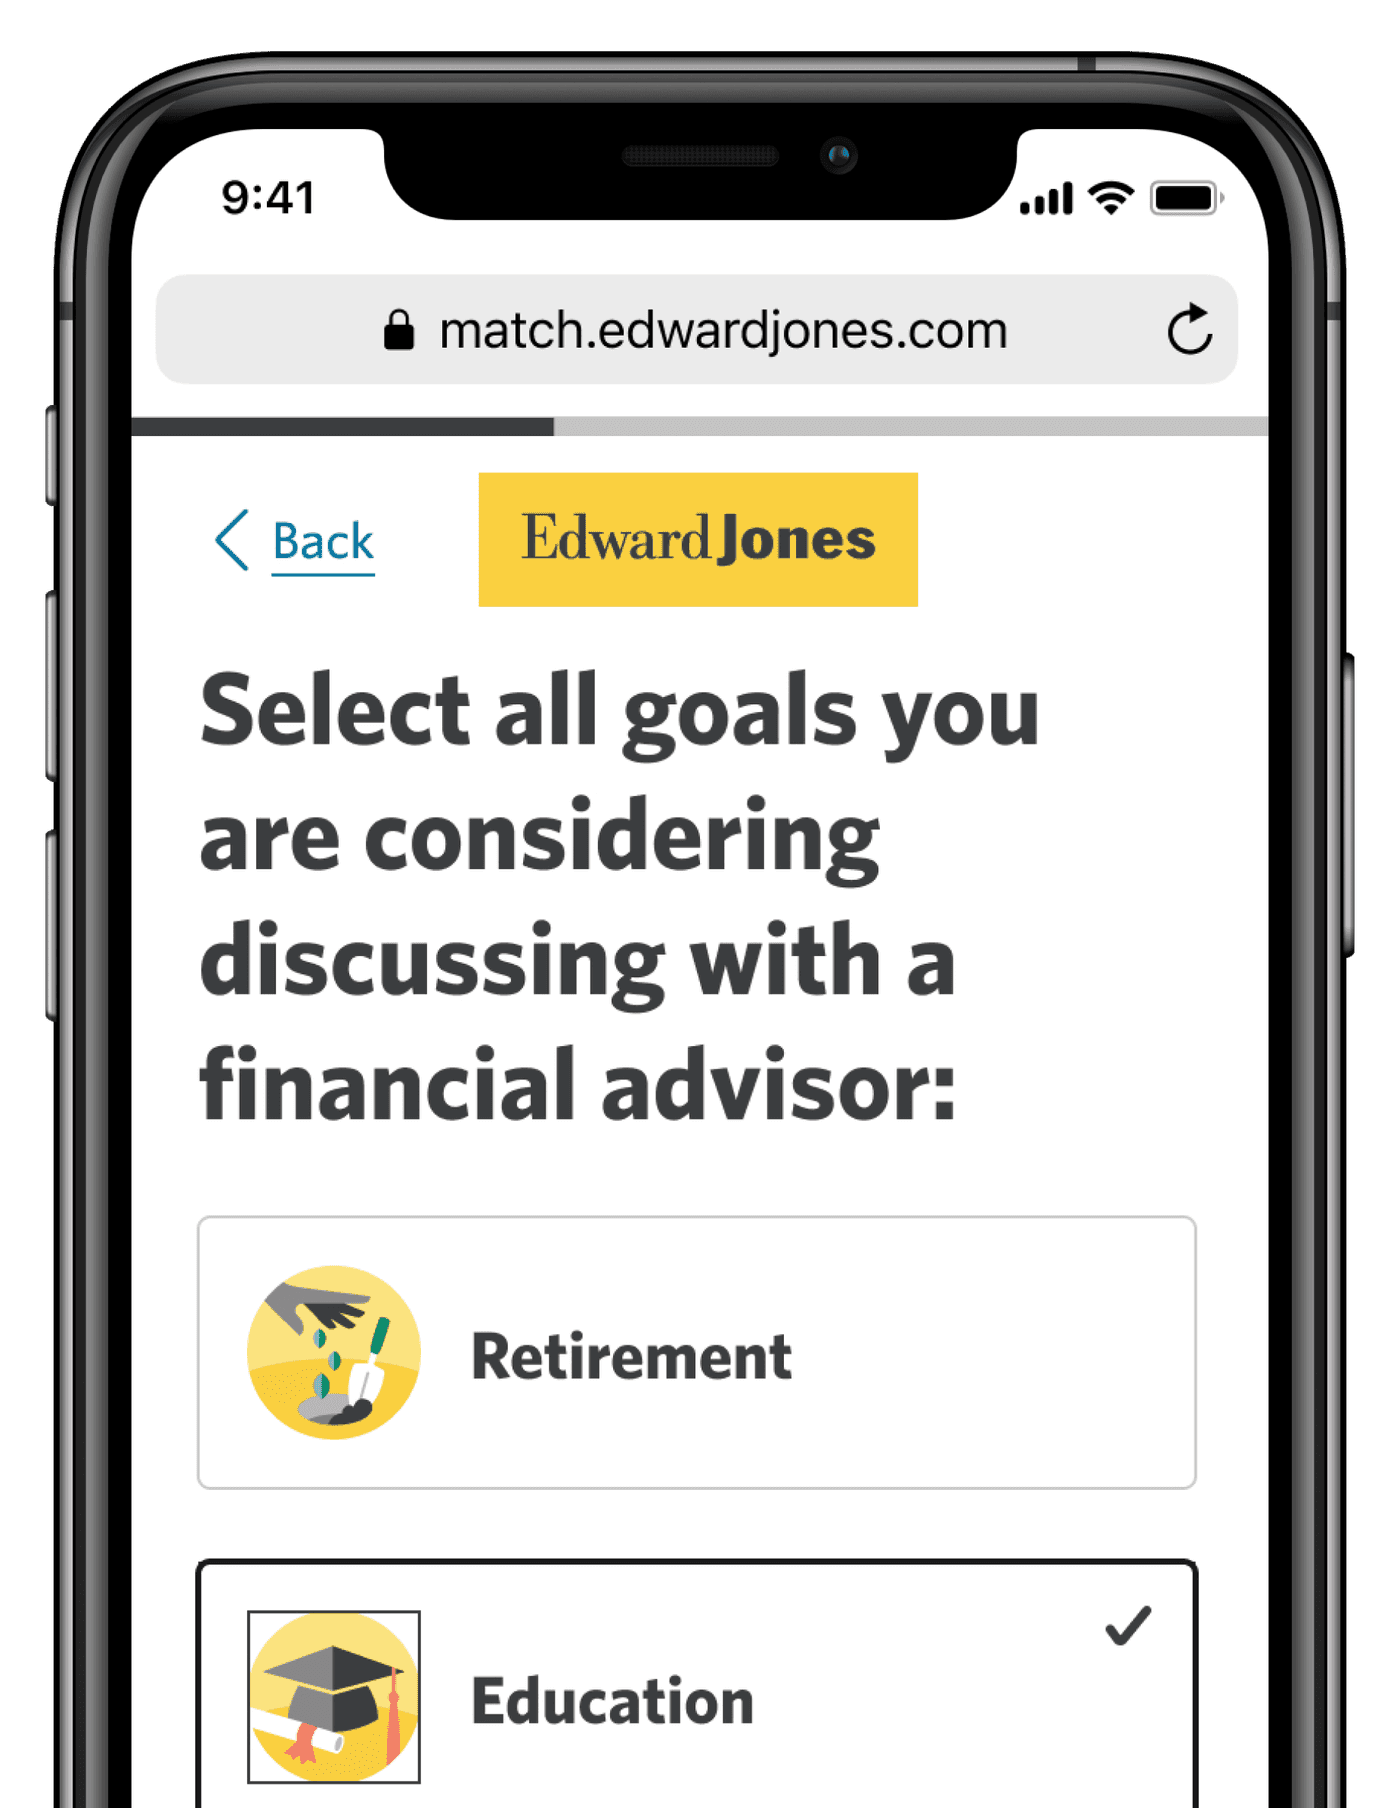 A mockup of a mobile phone displaying the edward jones match website.